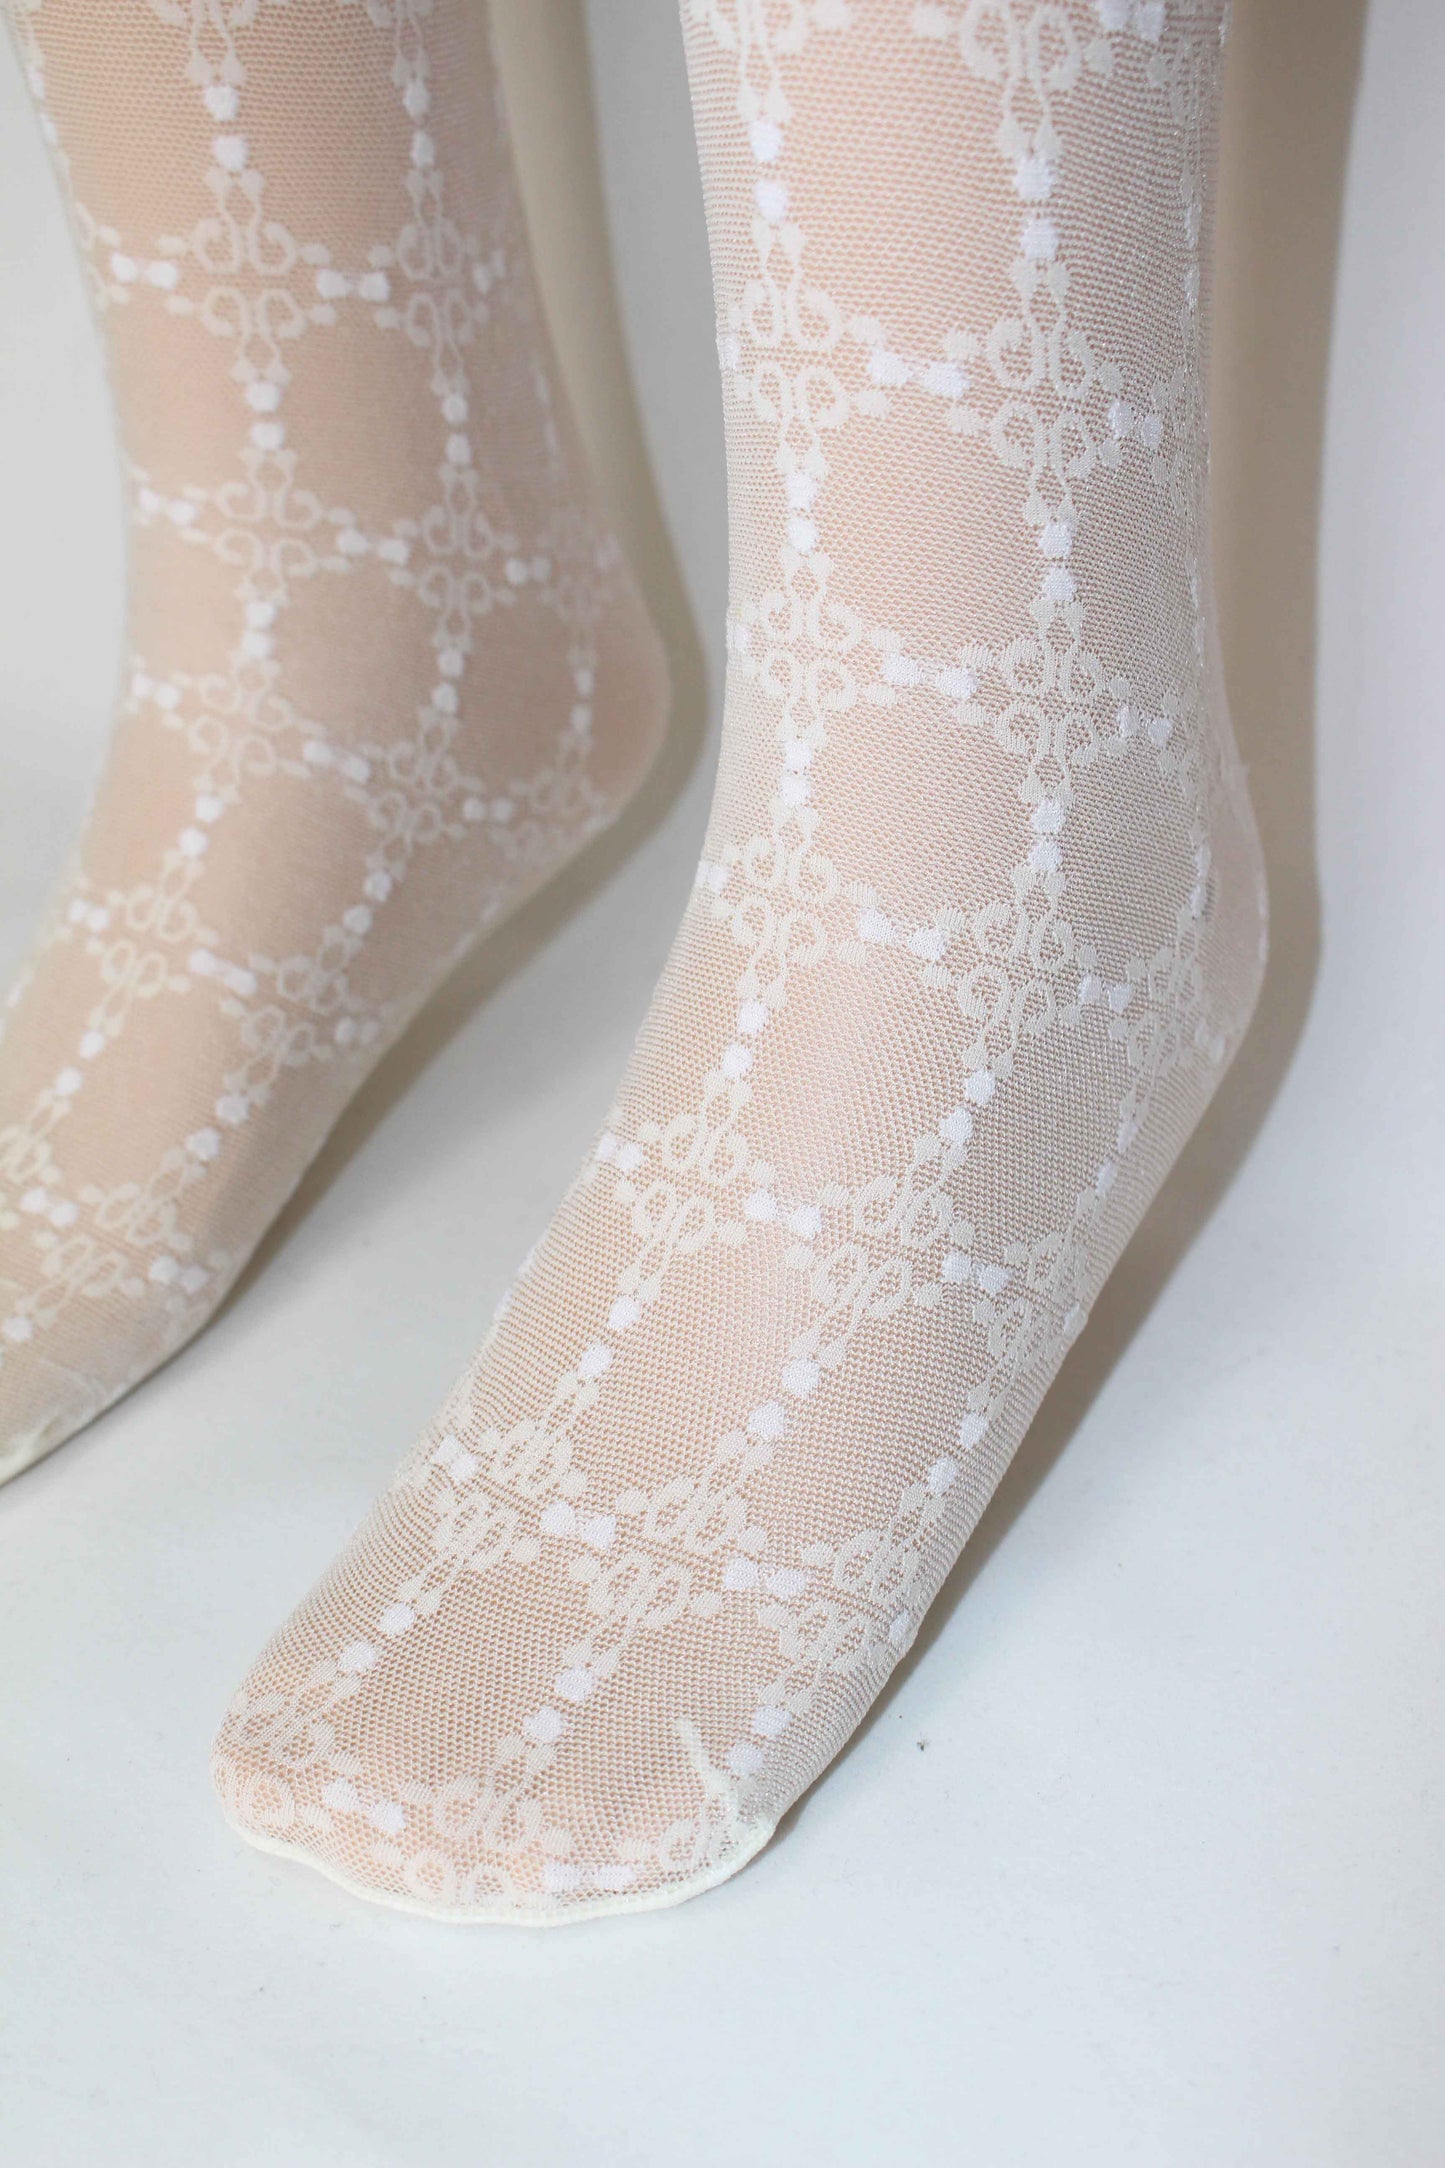 Omsa Serenella Decor Collant - Ivory / cream semi sheer micro mesh children's fashion tights with a woven lace style grid pattern with white dots.